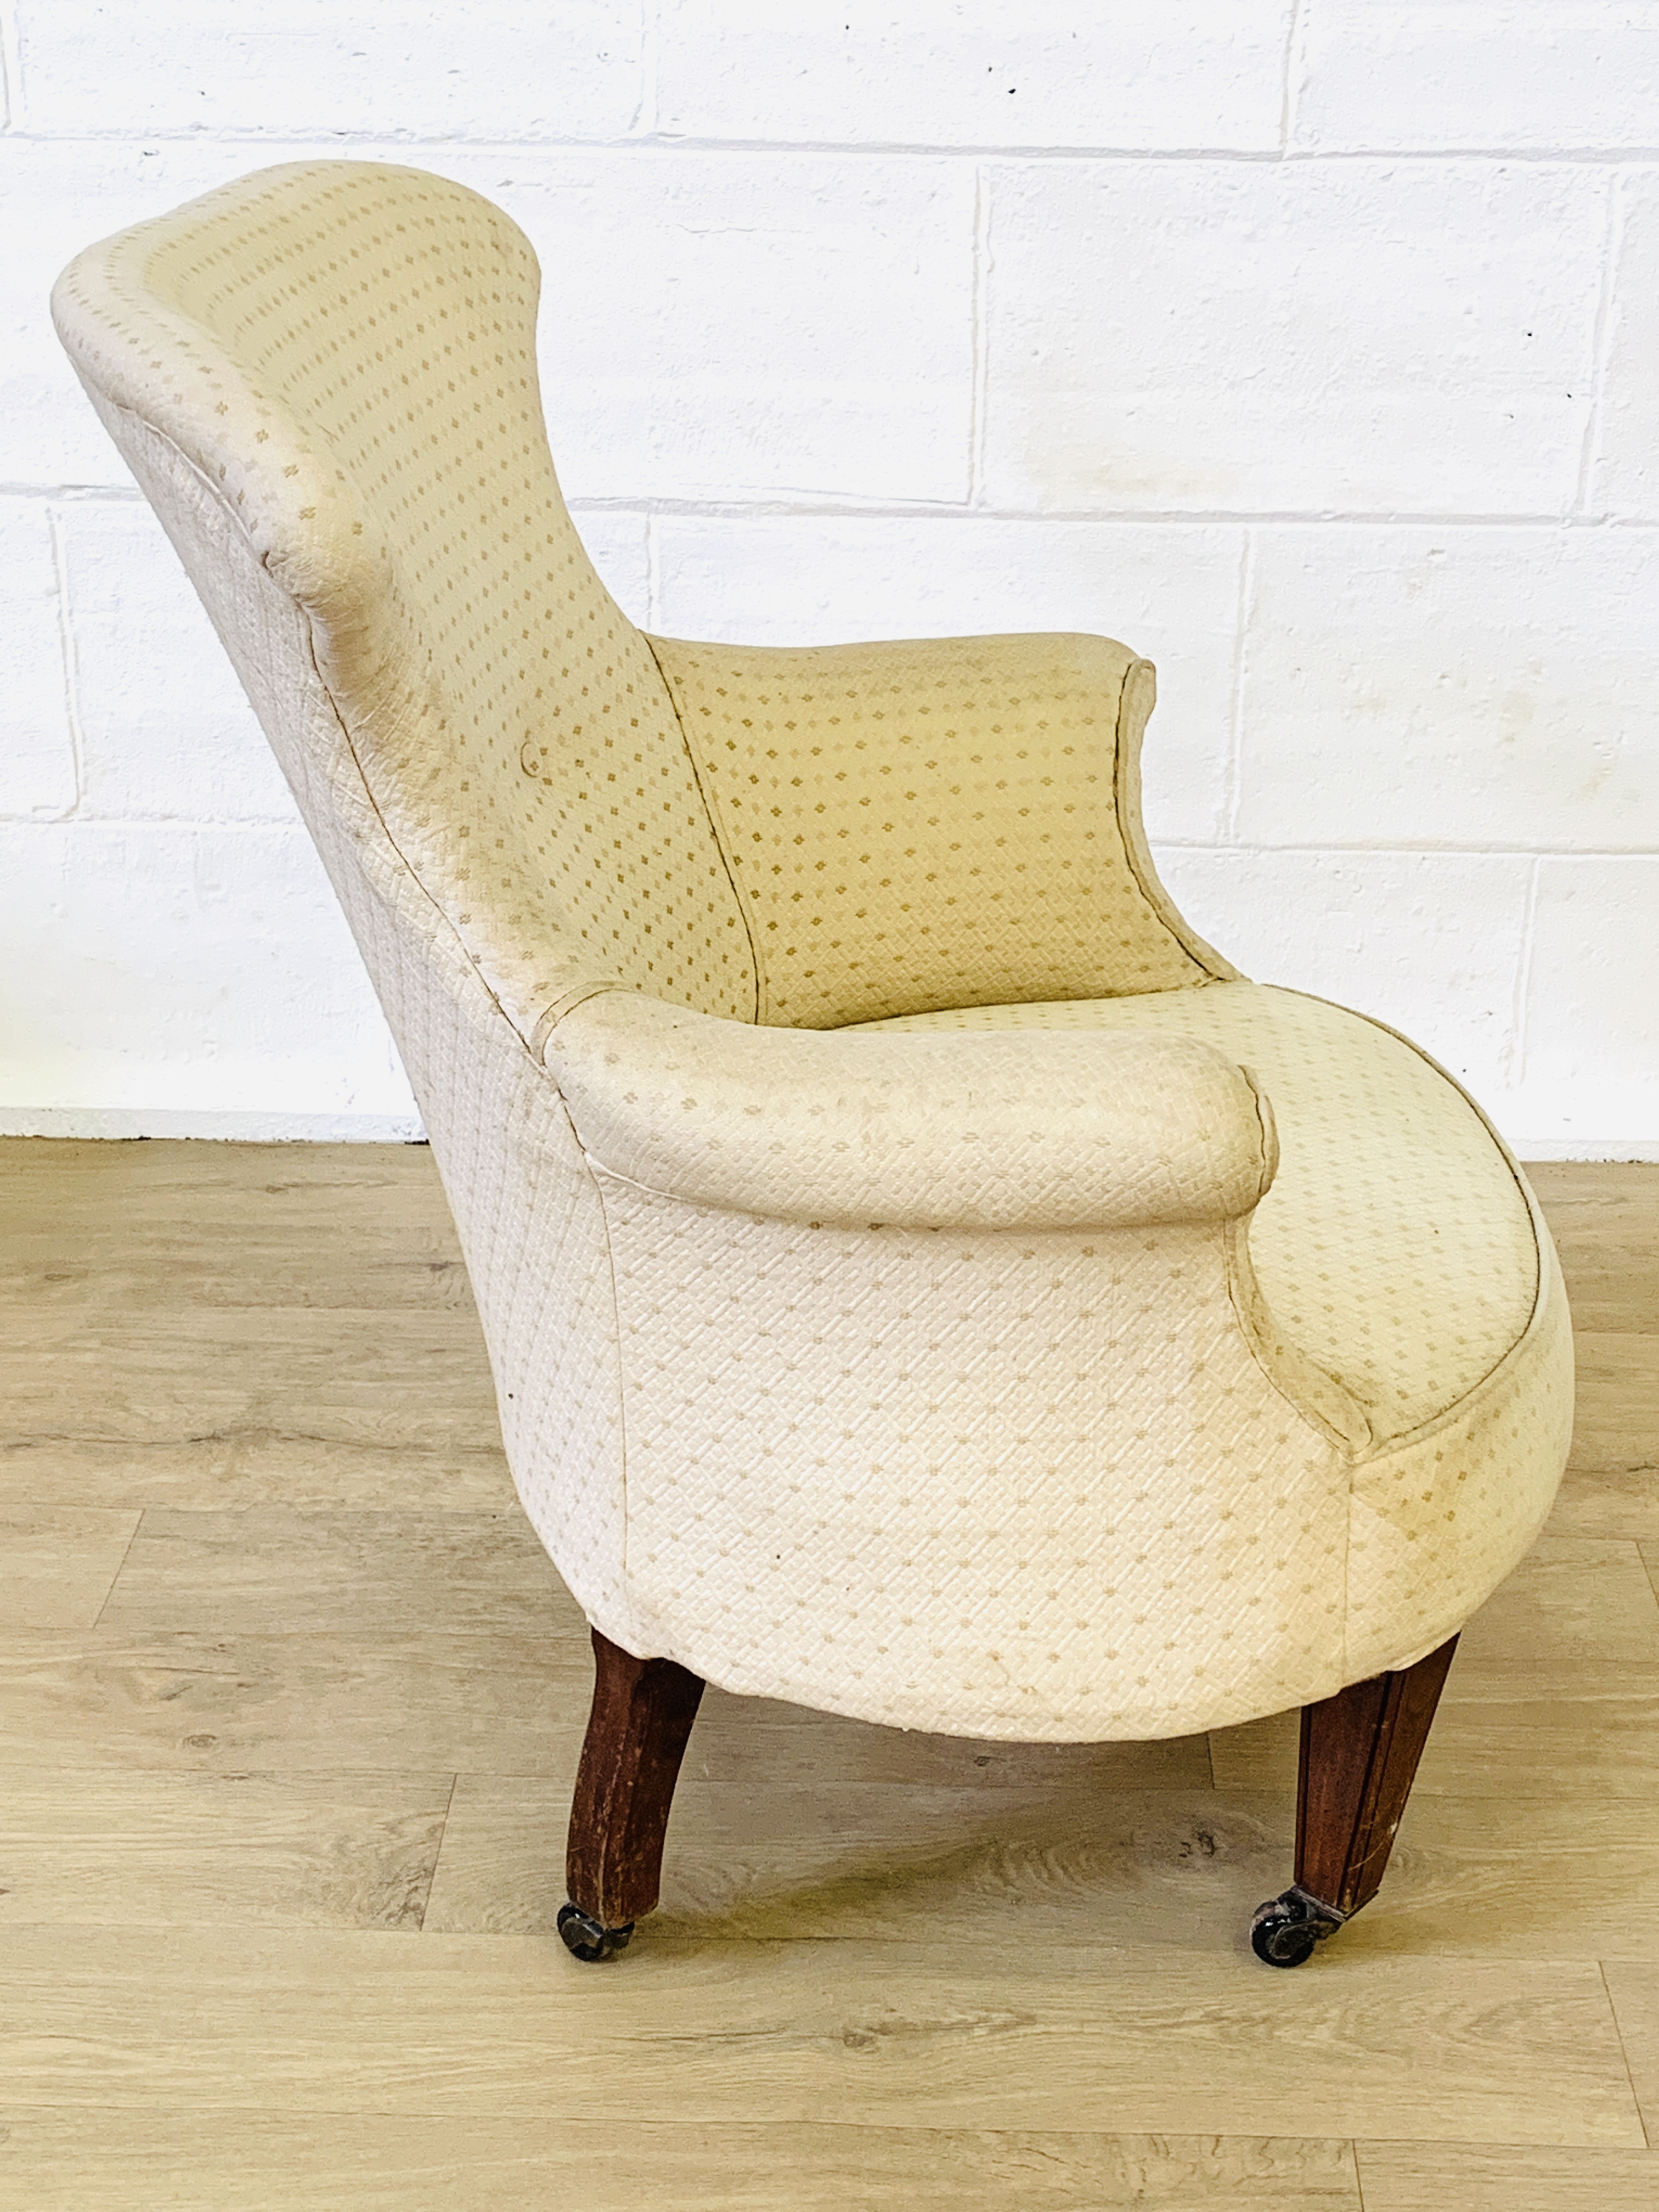 Cream upholstered button back bedroom armchair - Image 4 of 4